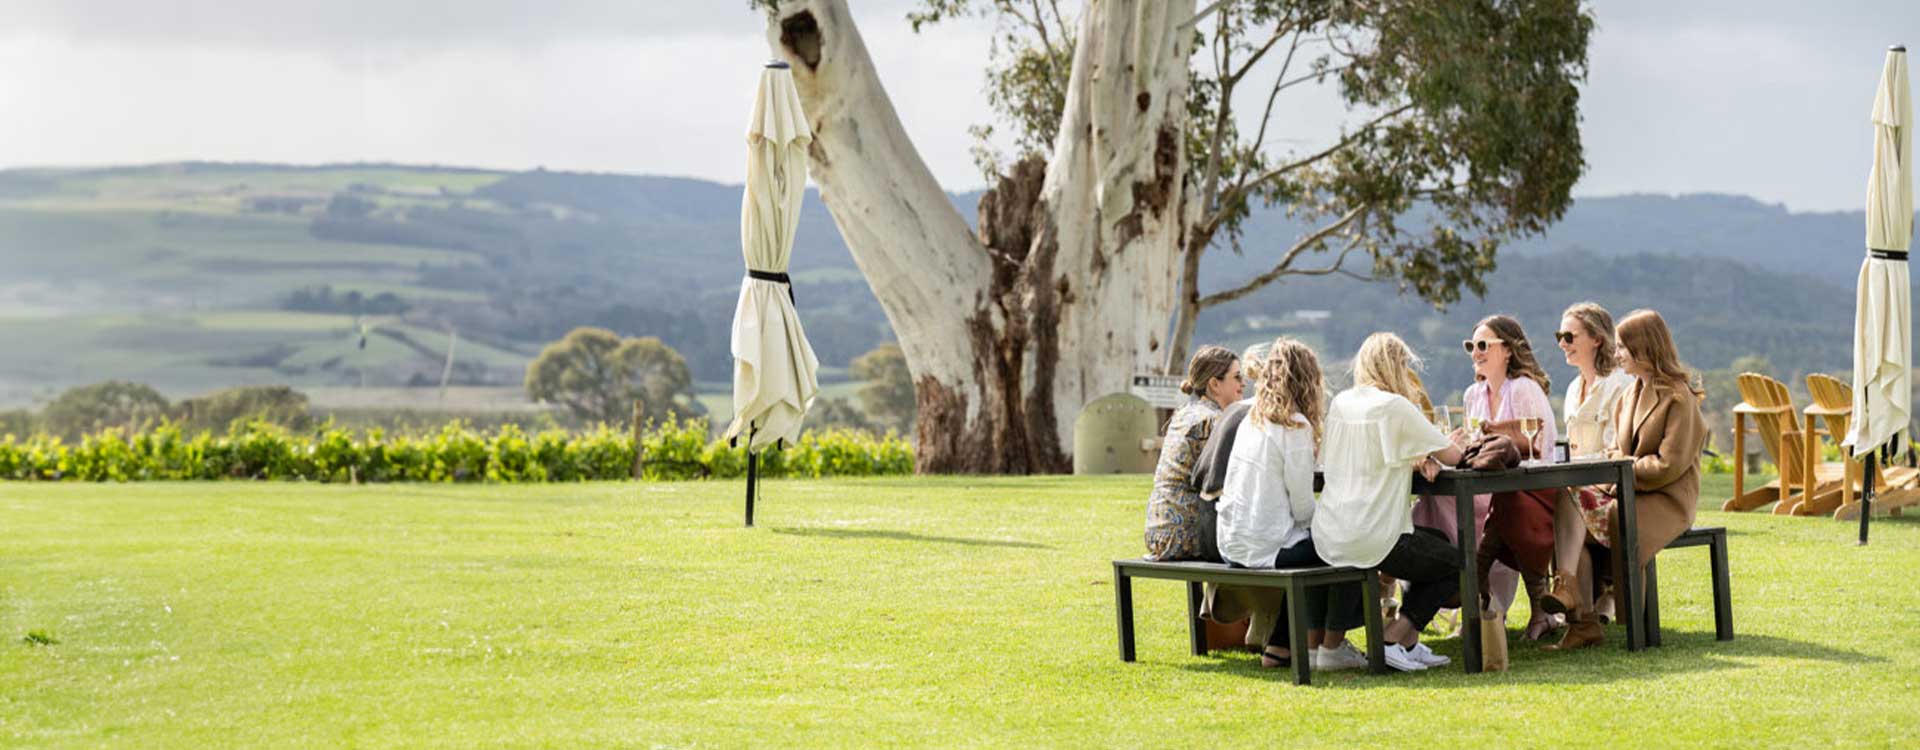 <br>
<h1><span style="color:#ffffff;">Enjoy Easter with your family <br>at our Cellar Door</span></h1>